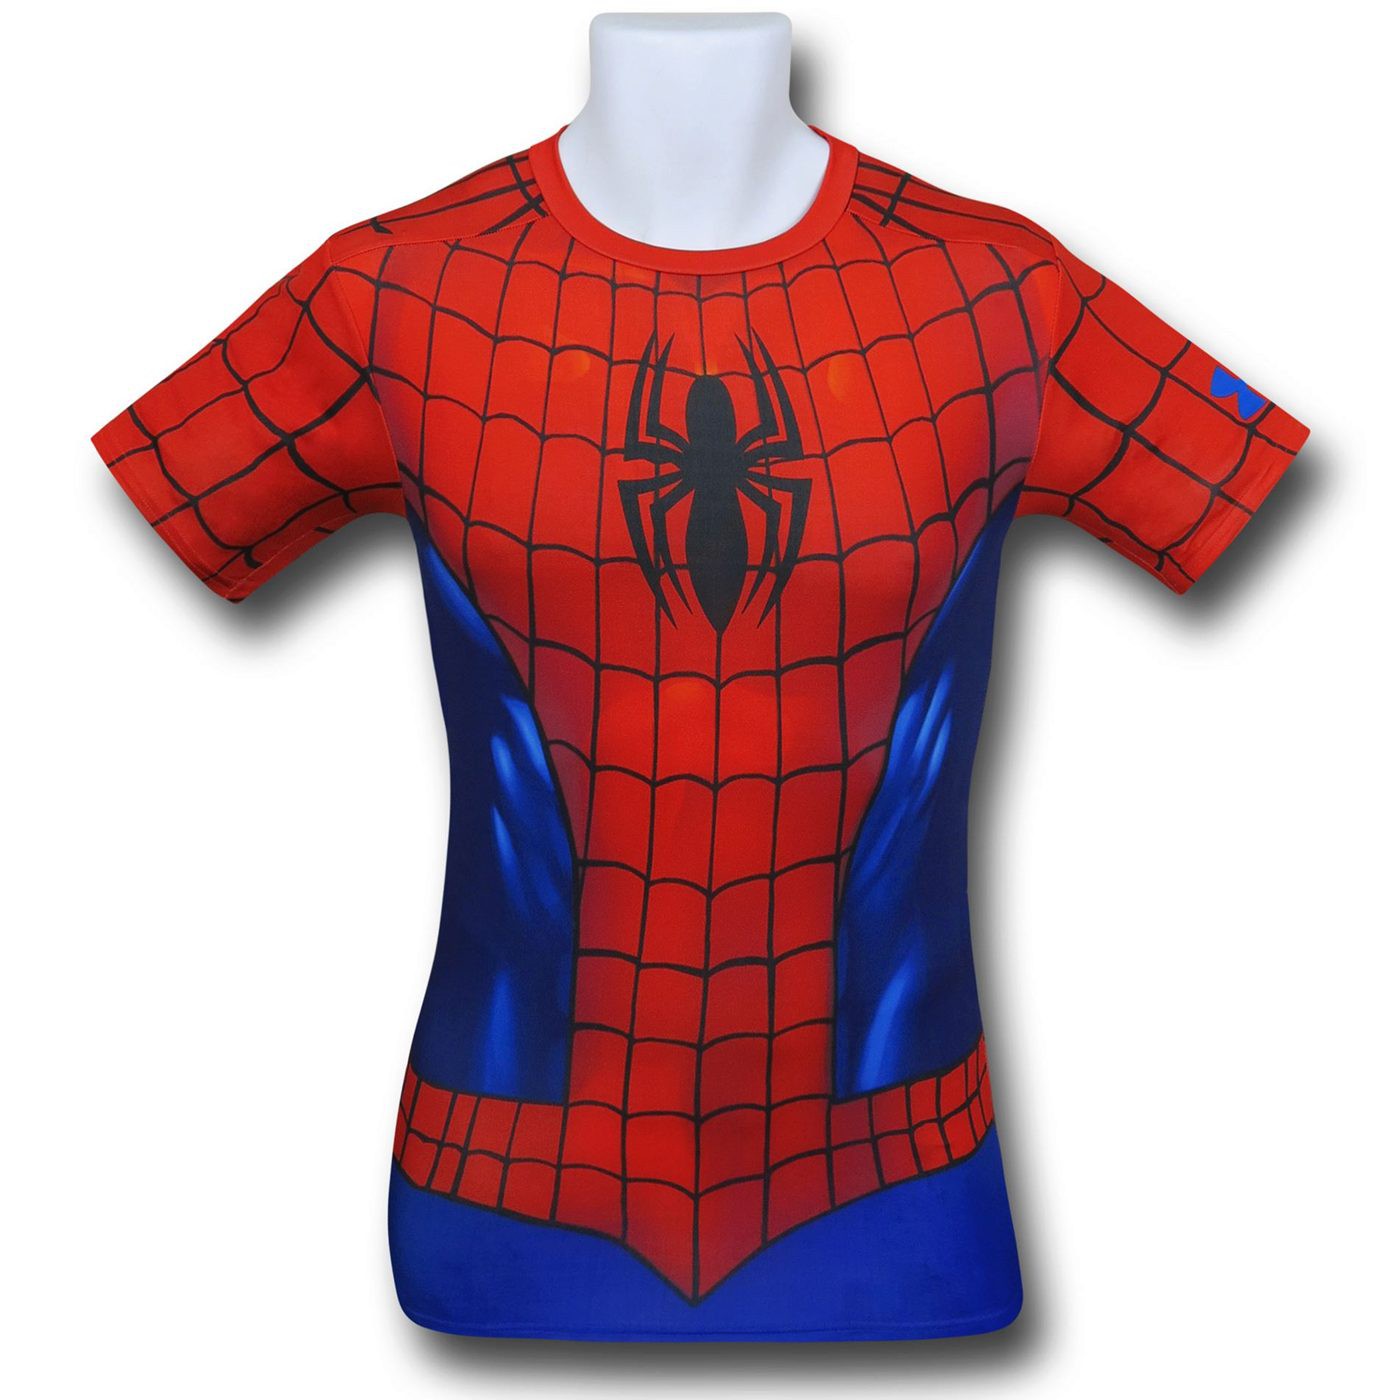 Spiderman Costume Under Armour Compression T-Shirt